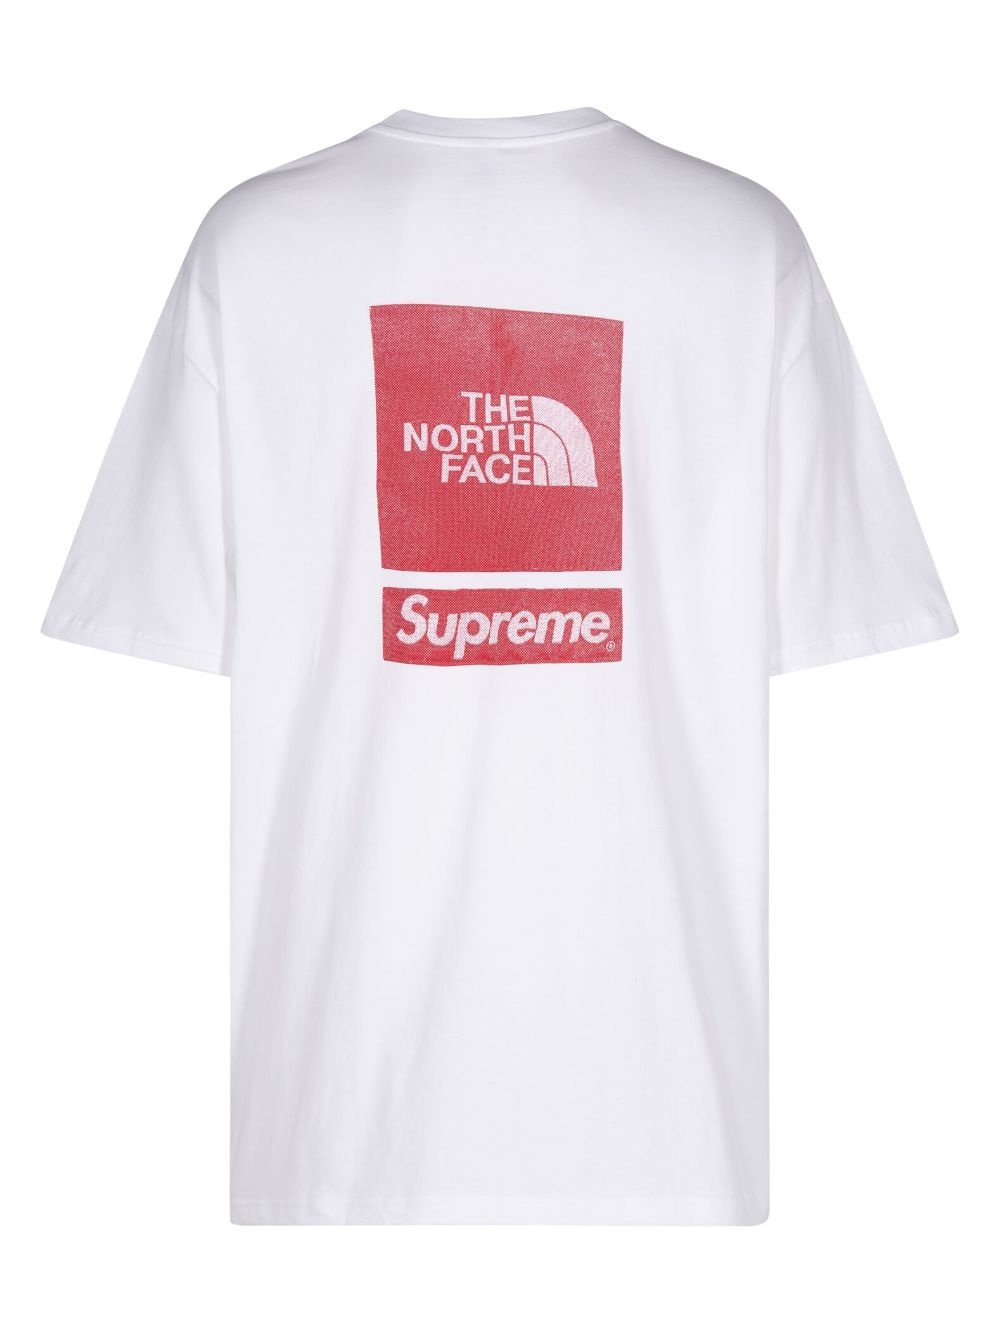 x The North Face "White" T-shirt - 2